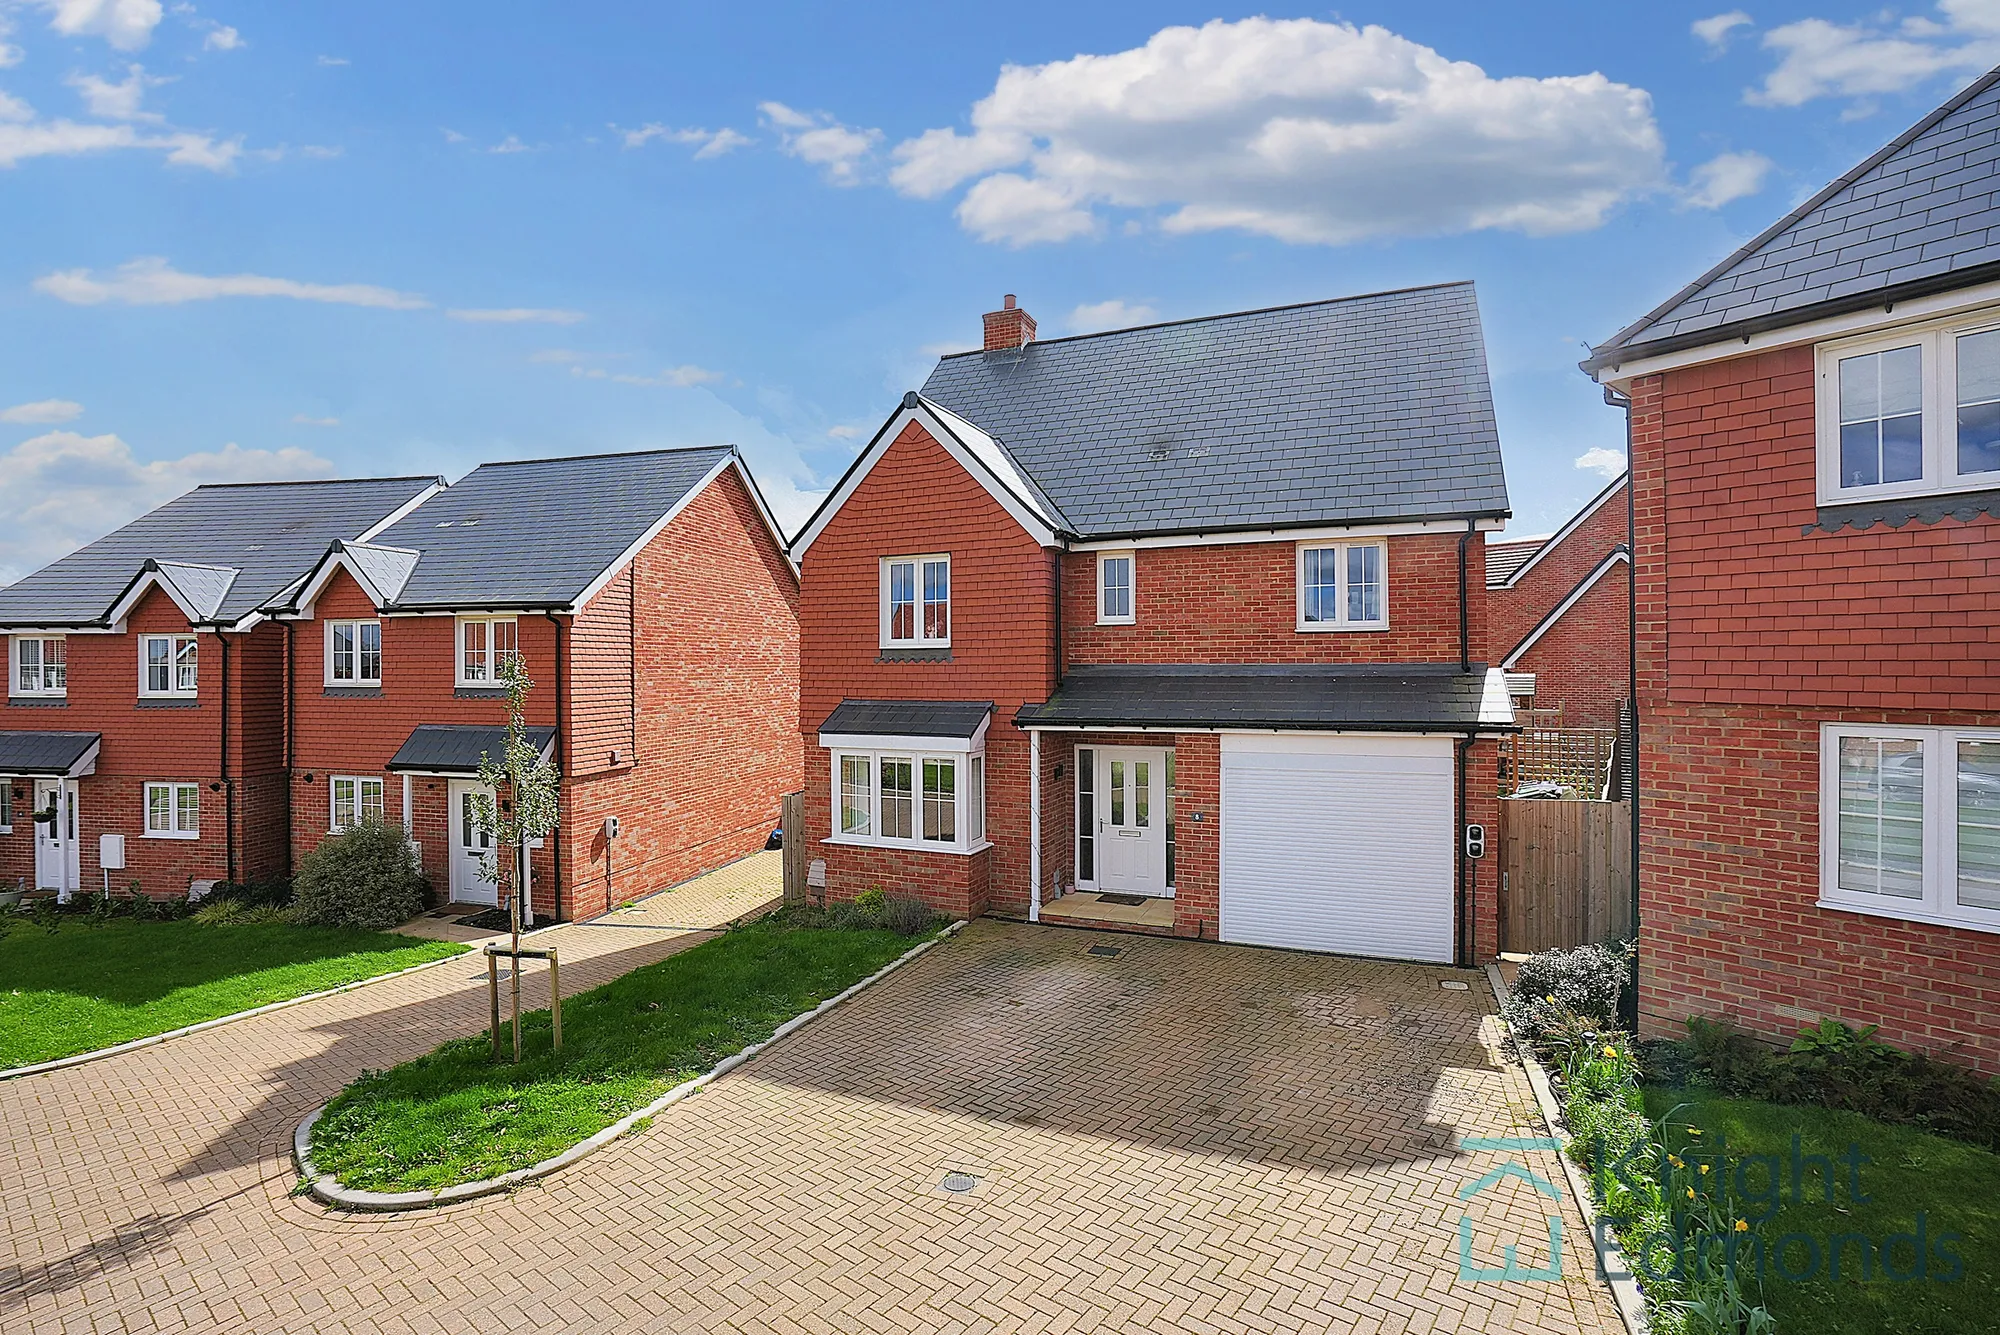 4 bed detached house for sale in Meadow Crescent, Maidstone - Property Image 1